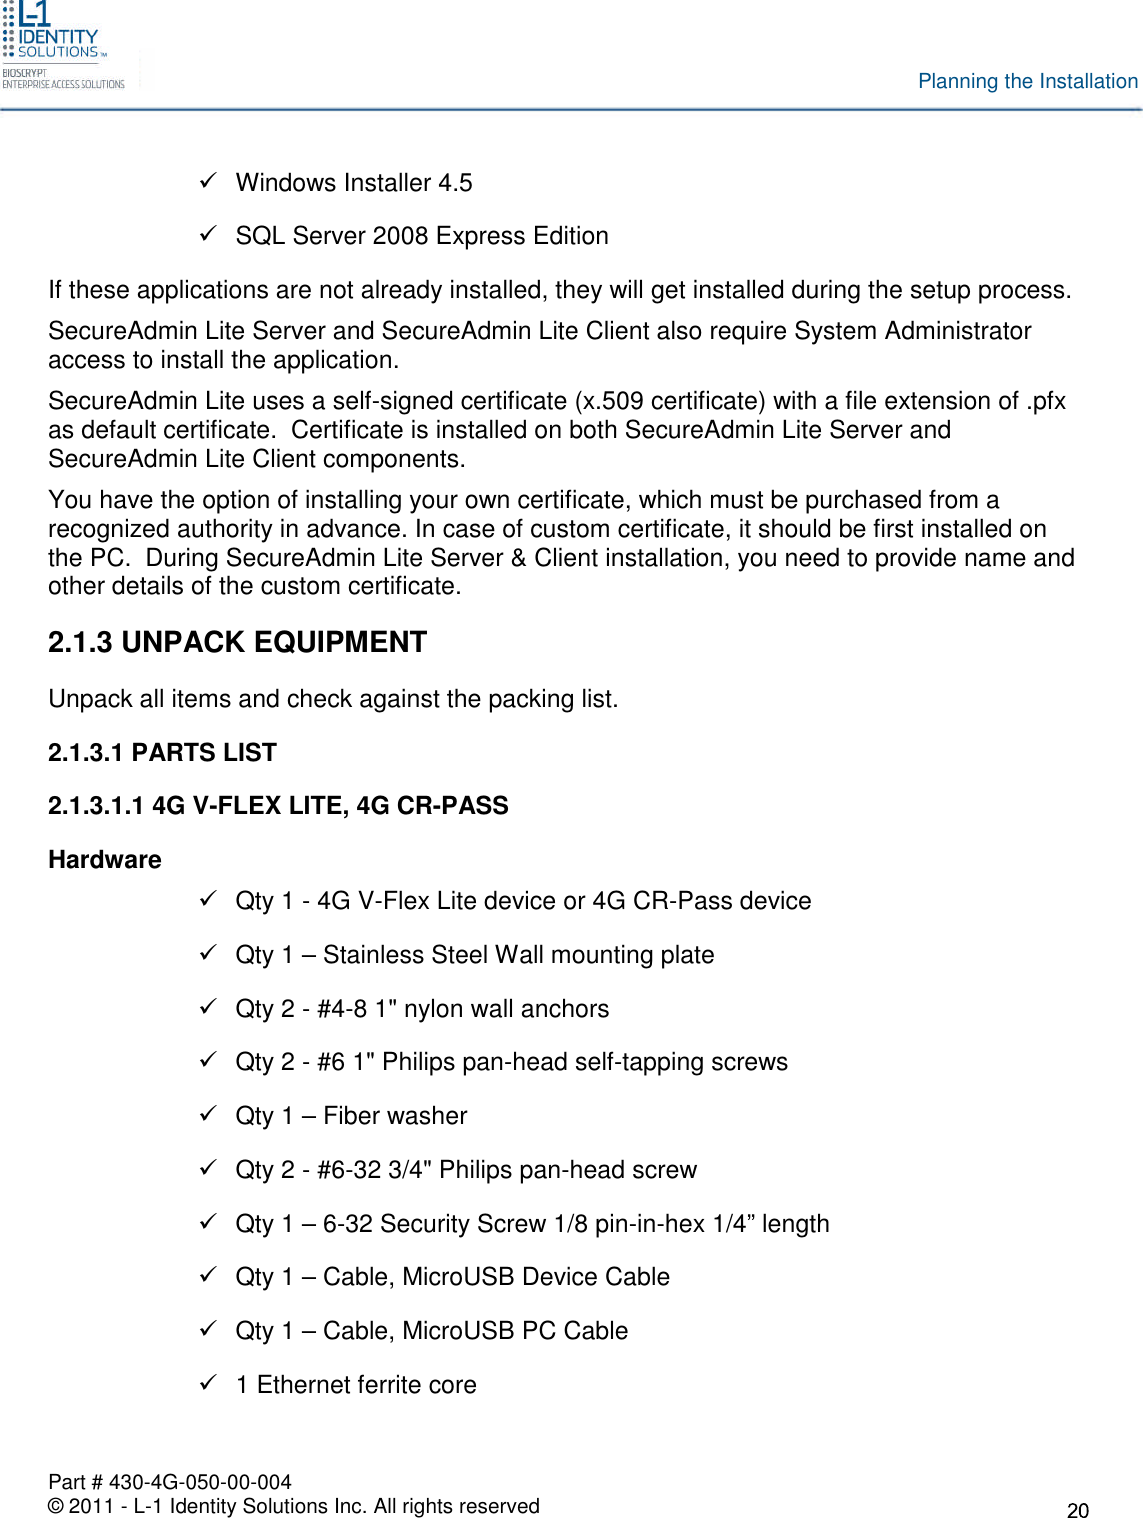 Part # 430-4G-050-00-004© 2011 - L-1 Identity Solutions Inc. All rights reservedPlanning the InstallationWindows Installer 4.5SQL Server 2008 Express EditionIf these applications are not already installed, they will get installed during the setup process.SecureAdmin Lite Server and SecureAdmin Lite Client also require System Administratoraccess to install the application.SecureAdmin Lite uses a self-signed certificate (x.509 certificate) with a file extension of .pfxas default certificate. Certificate is installed on both SecureAdmin Lite Server andSecureAdmin Lite Client components.You have the option of installing your own certificate, which must be purchased from arecognized authority in advance. In case of custom certificate, it should be first installed onthe PC. During SecureAdmin Lite Server &amp; Client installation, you need to provide name andother details of the custom certificate.2.1.3 UNPACK EQUIPMENTUnpack all items and check against the packing list.2.1.3.1 PARTS LIST2.1.3.1.1 4G V-FLEX LITE, 4G CR-PASSHardwareQty 1 - 4G V-Flex Lite device or 4G CR-Pass deviceQty 1 – Stainless Steel Wall mounting plateQty 2 - #4-8 1&quot; nylon wall anchorsQty 2 - #6 1&quot; Philips pan-head self-tapping screwsQty 1 – Fiber washerQty 2 - #6-32 3/4&quot; Philips pan-head screwQty 1 – 6-32 Security Screw 1/8 pin-in-hex 1/4” lengthQty 1 – Cable, MicroUSB Device CableQty 1 – Cable, MicroUSB PC Cable1 Ethernet ferrite core